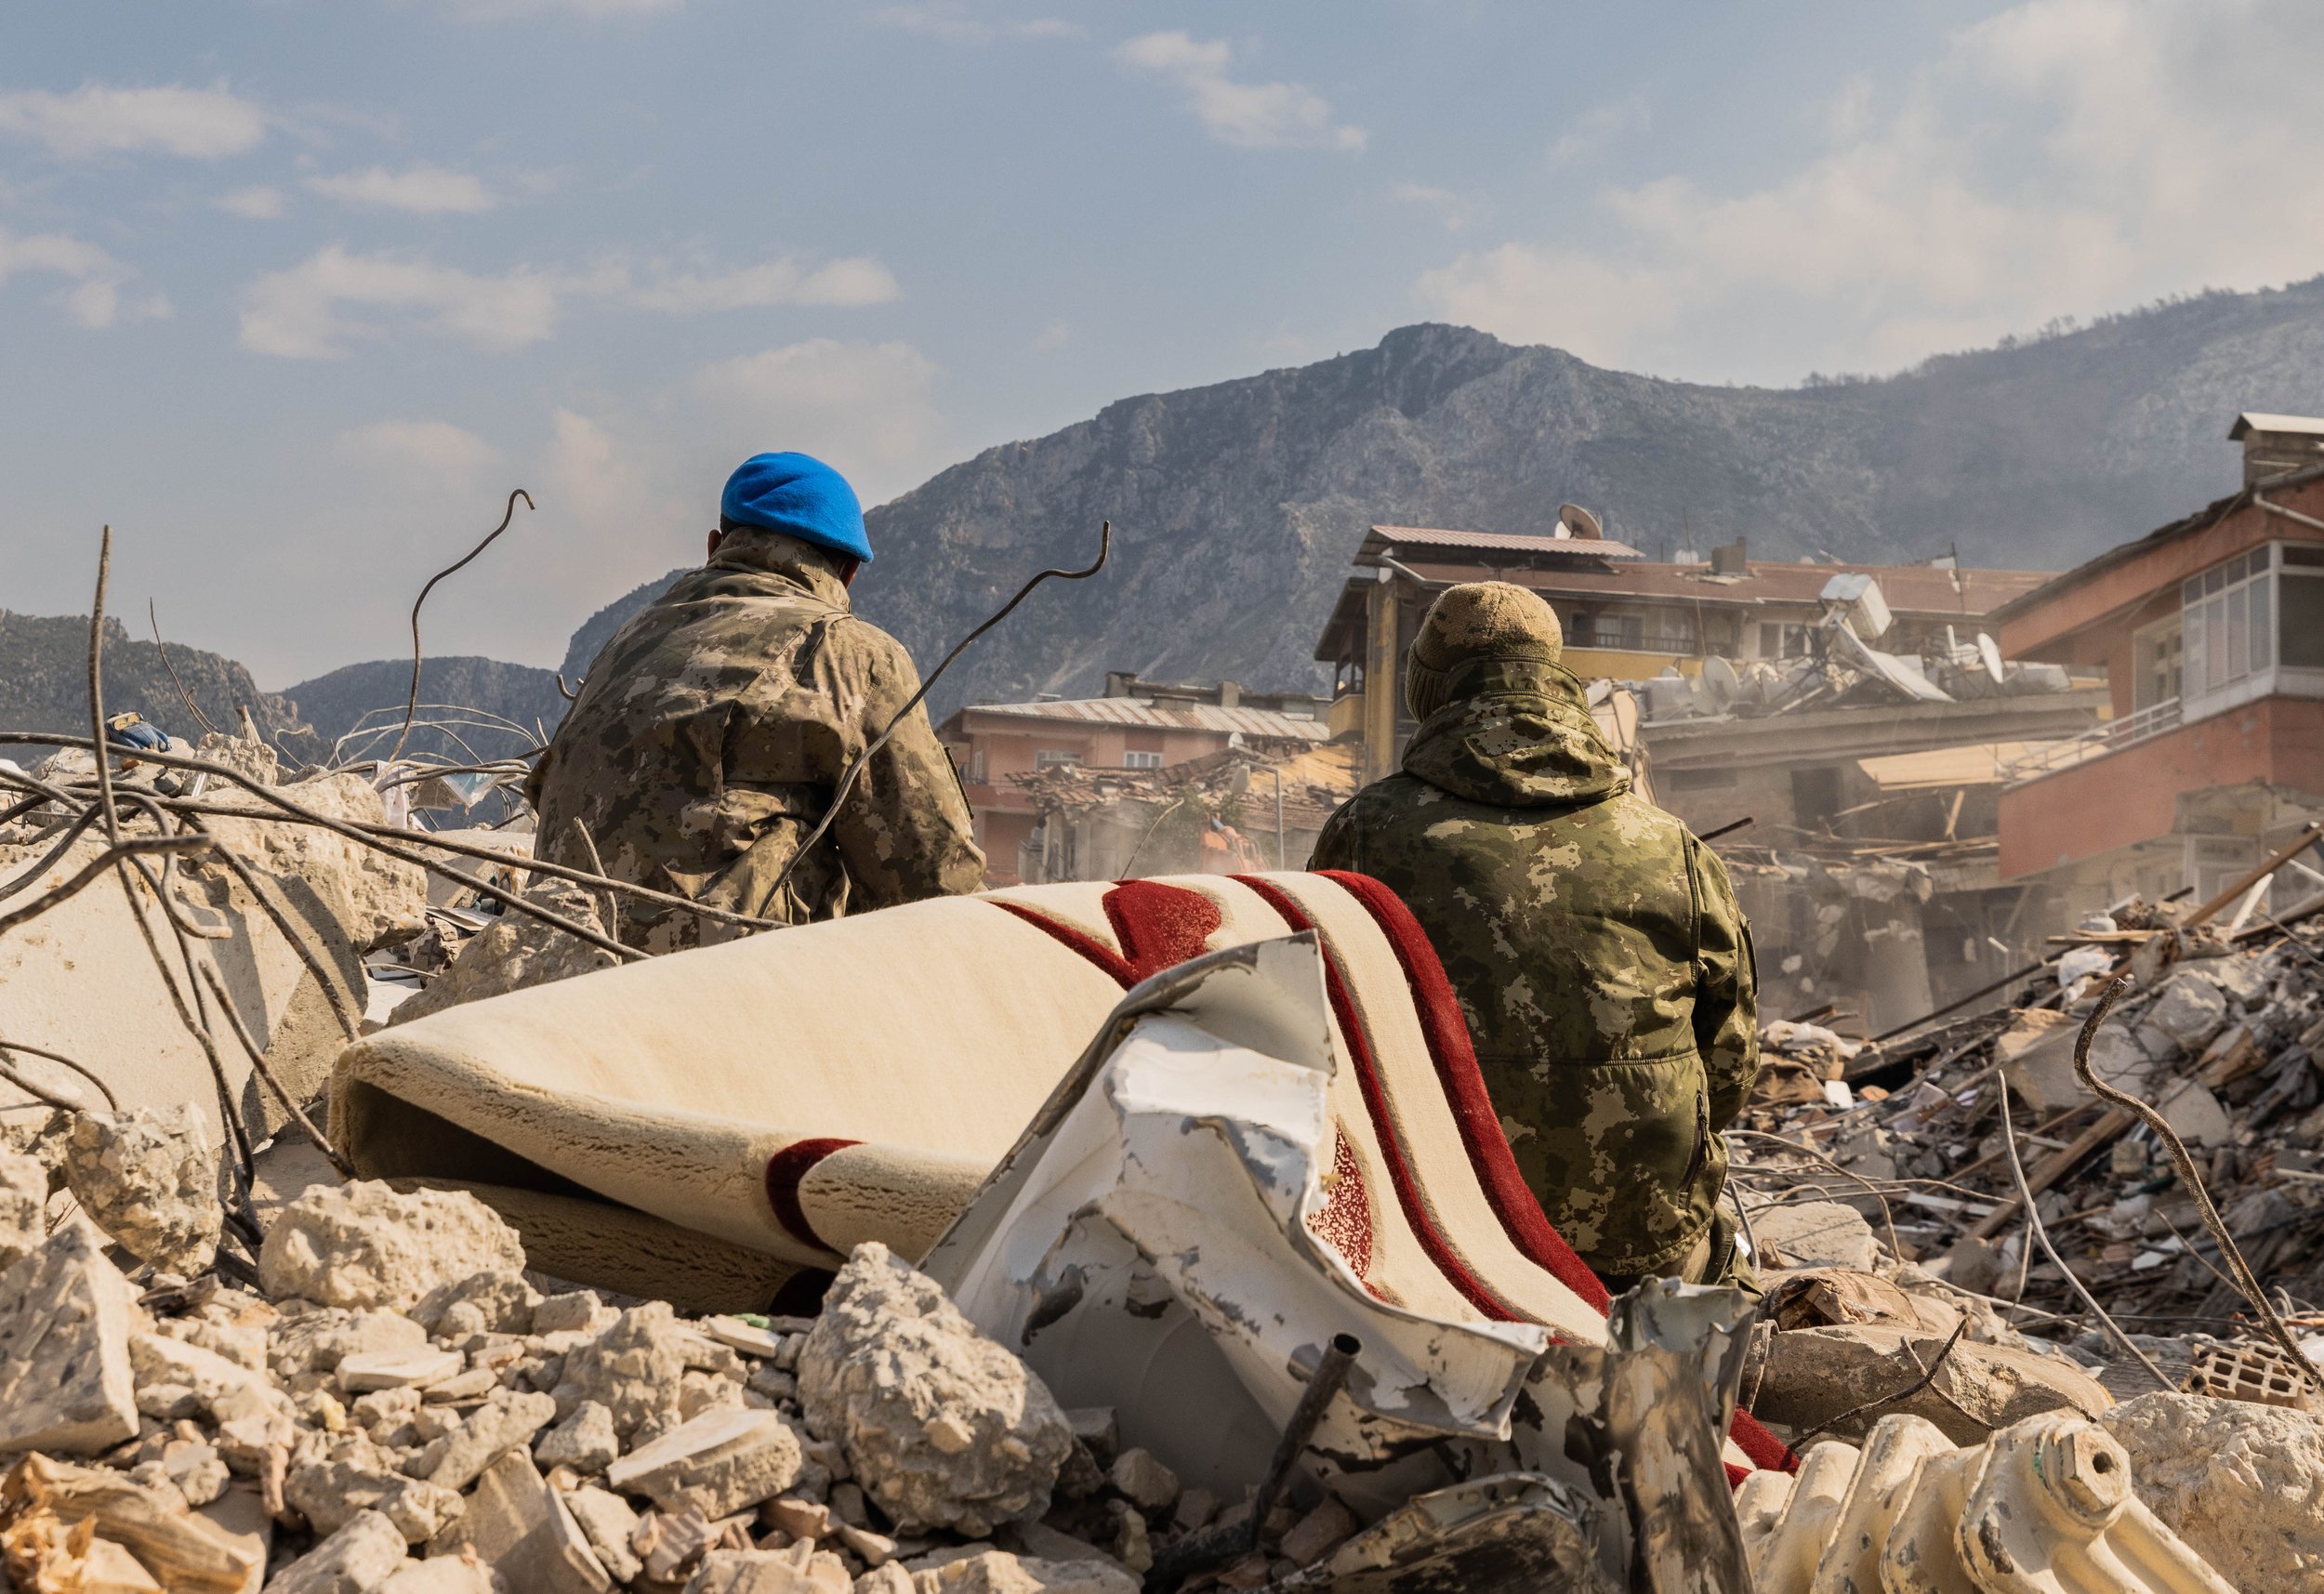  Two Turkish military members sit in the debris of buildings in Hatay, Turkey On February 11, 2022.  